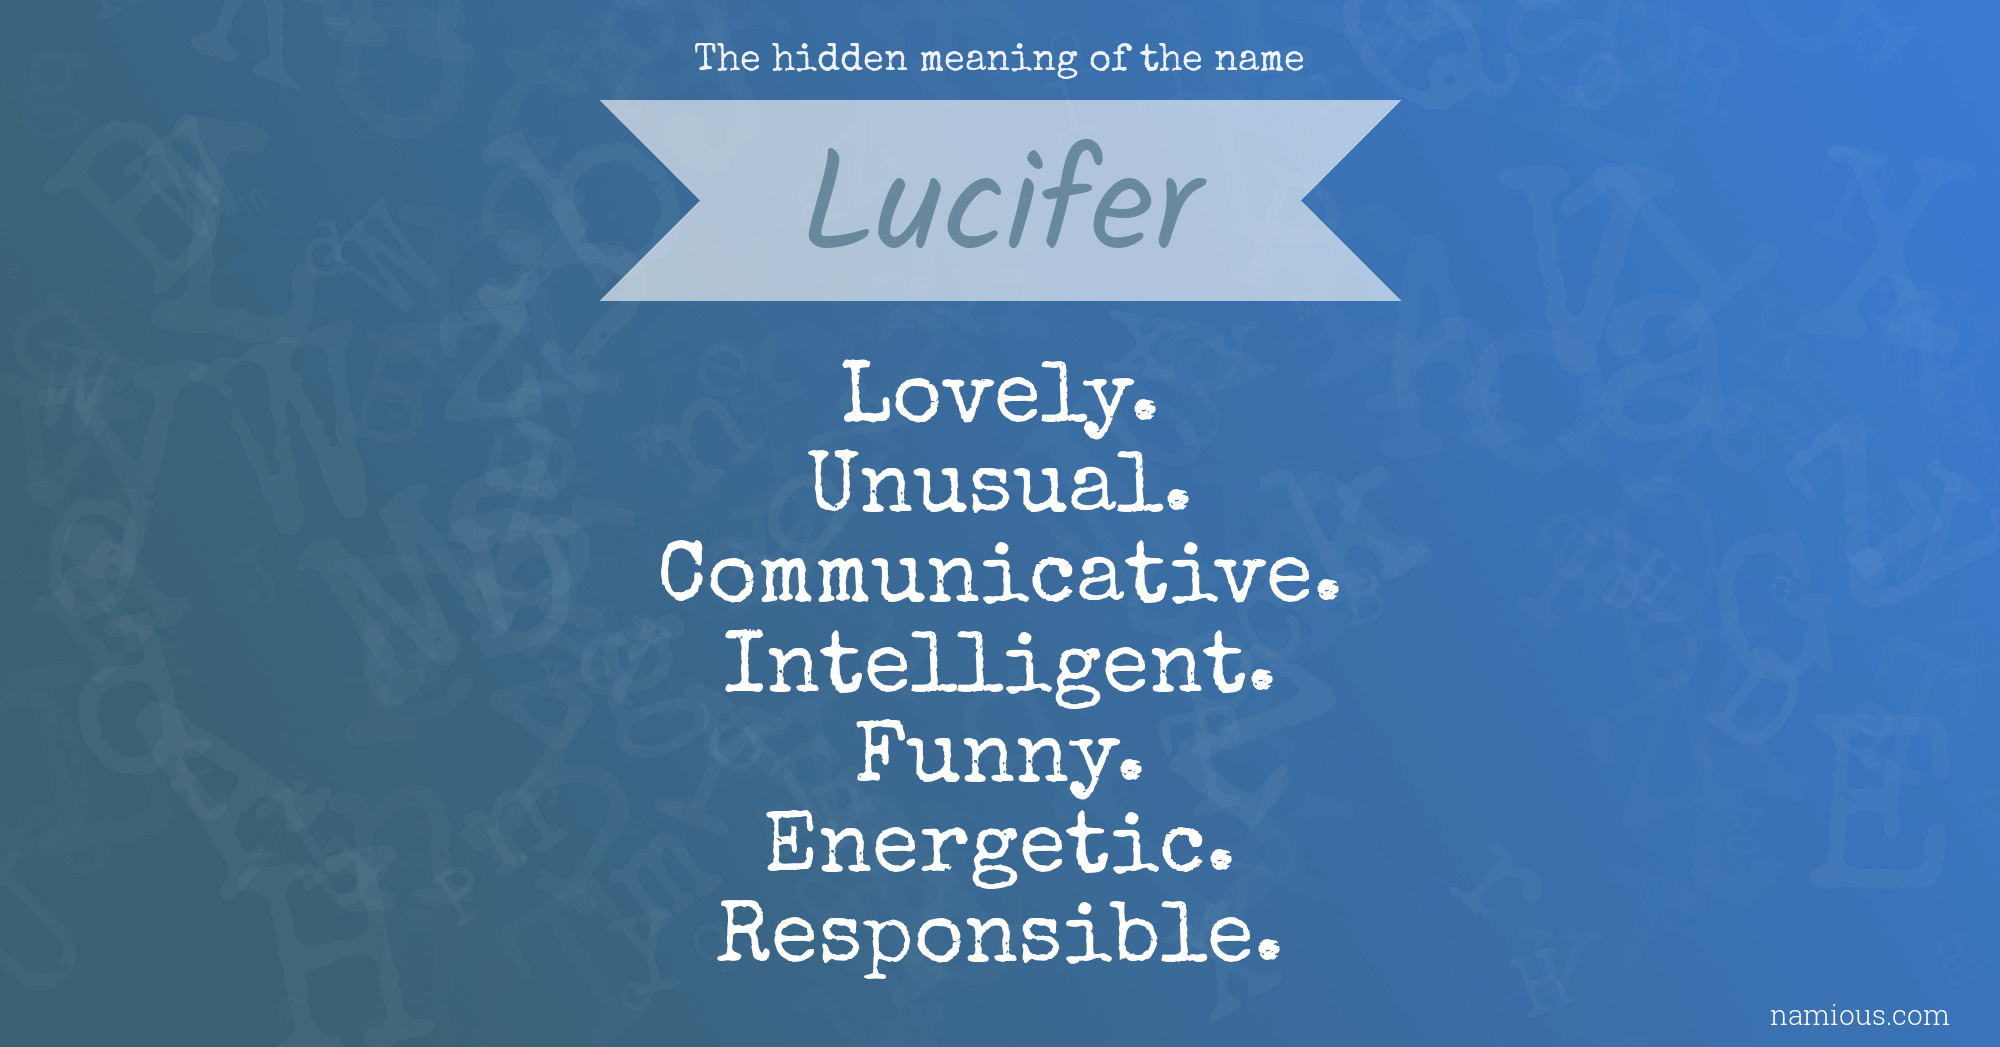 The hidden meaning of the name Lucifer